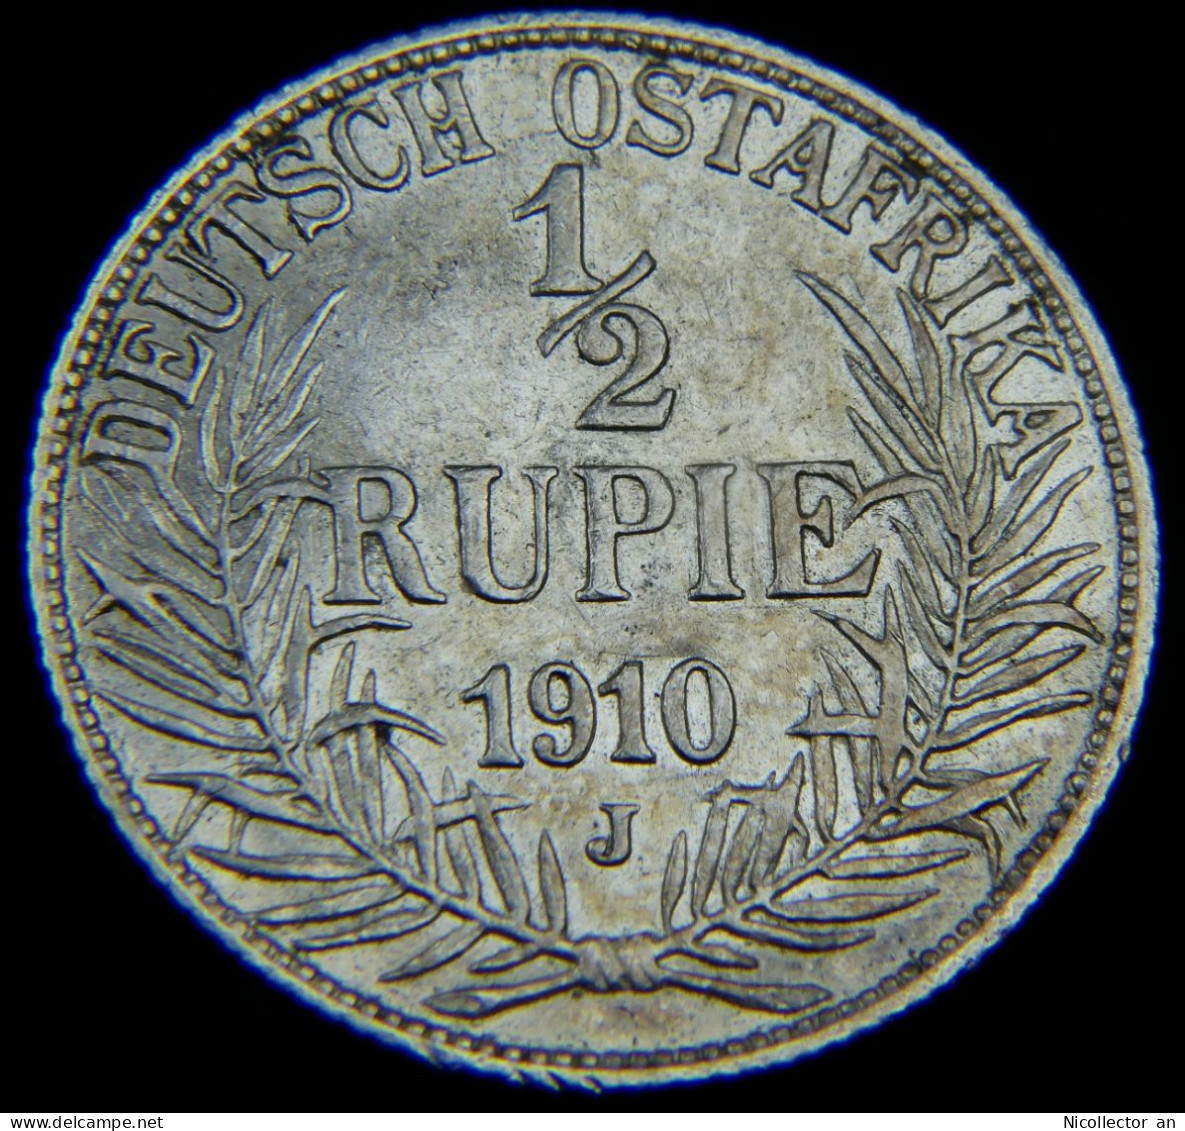 Germany East Africa 1/2 Rupee 1910 J *AU* Silver Rare Coin - German East Africa